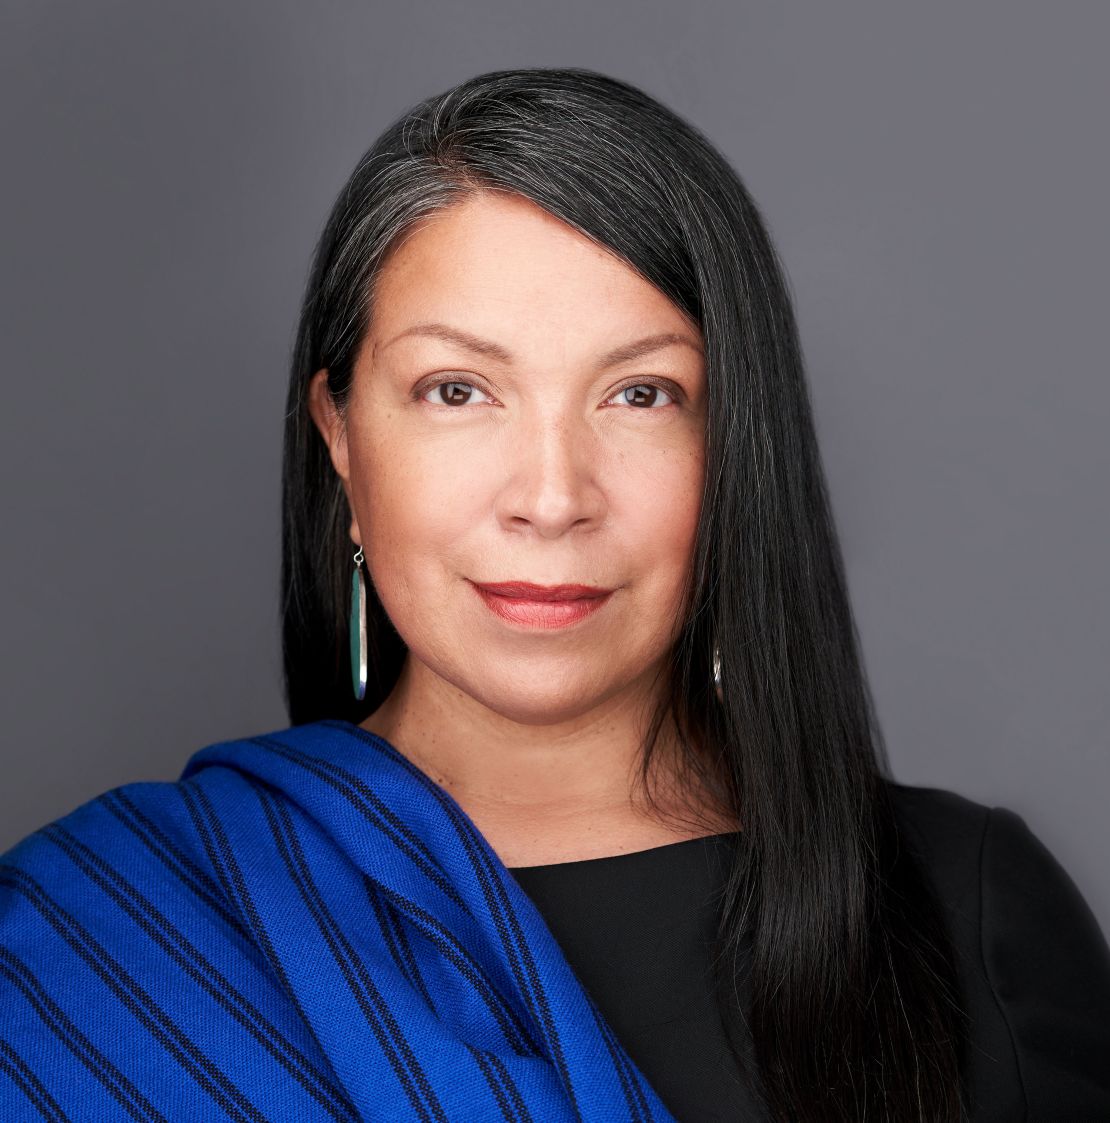 Patricia Marroquin Norby, the first full-time Native American curator at the Metropolitan Museum of Art